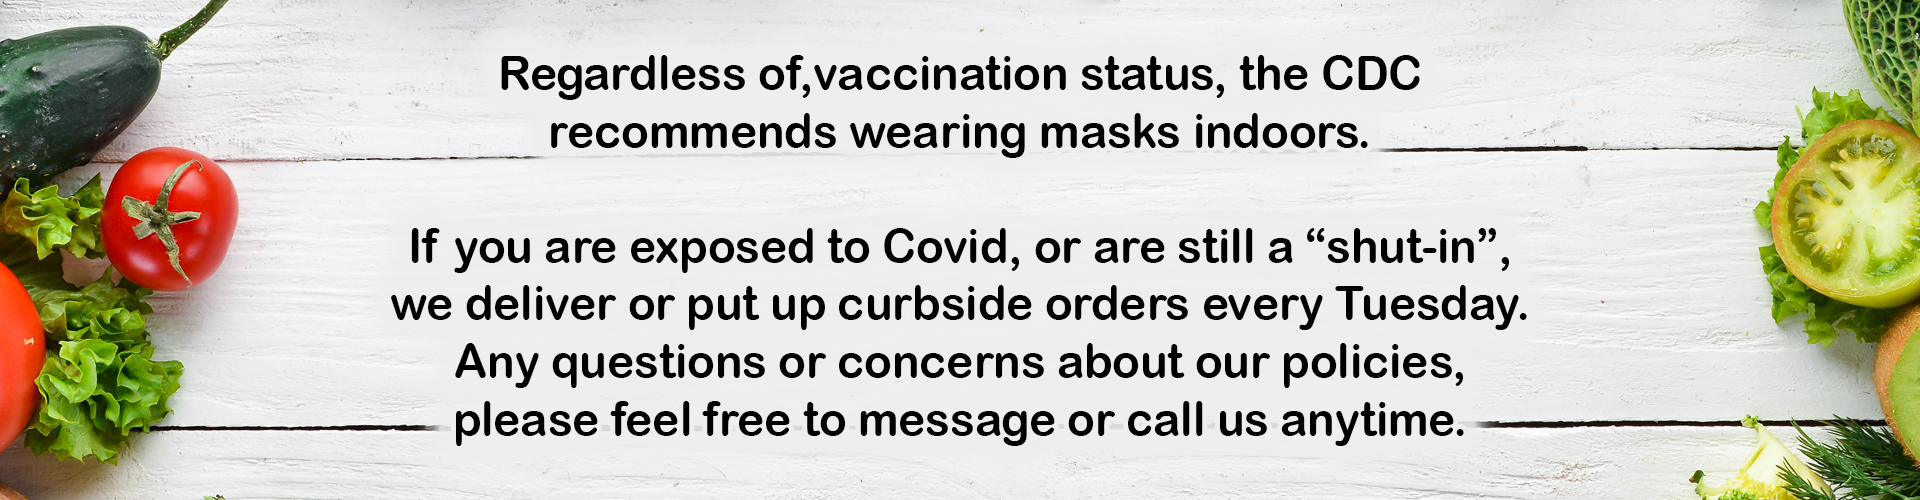 Regardless of vaccination status, the CDC recommends wearing masks indoors.